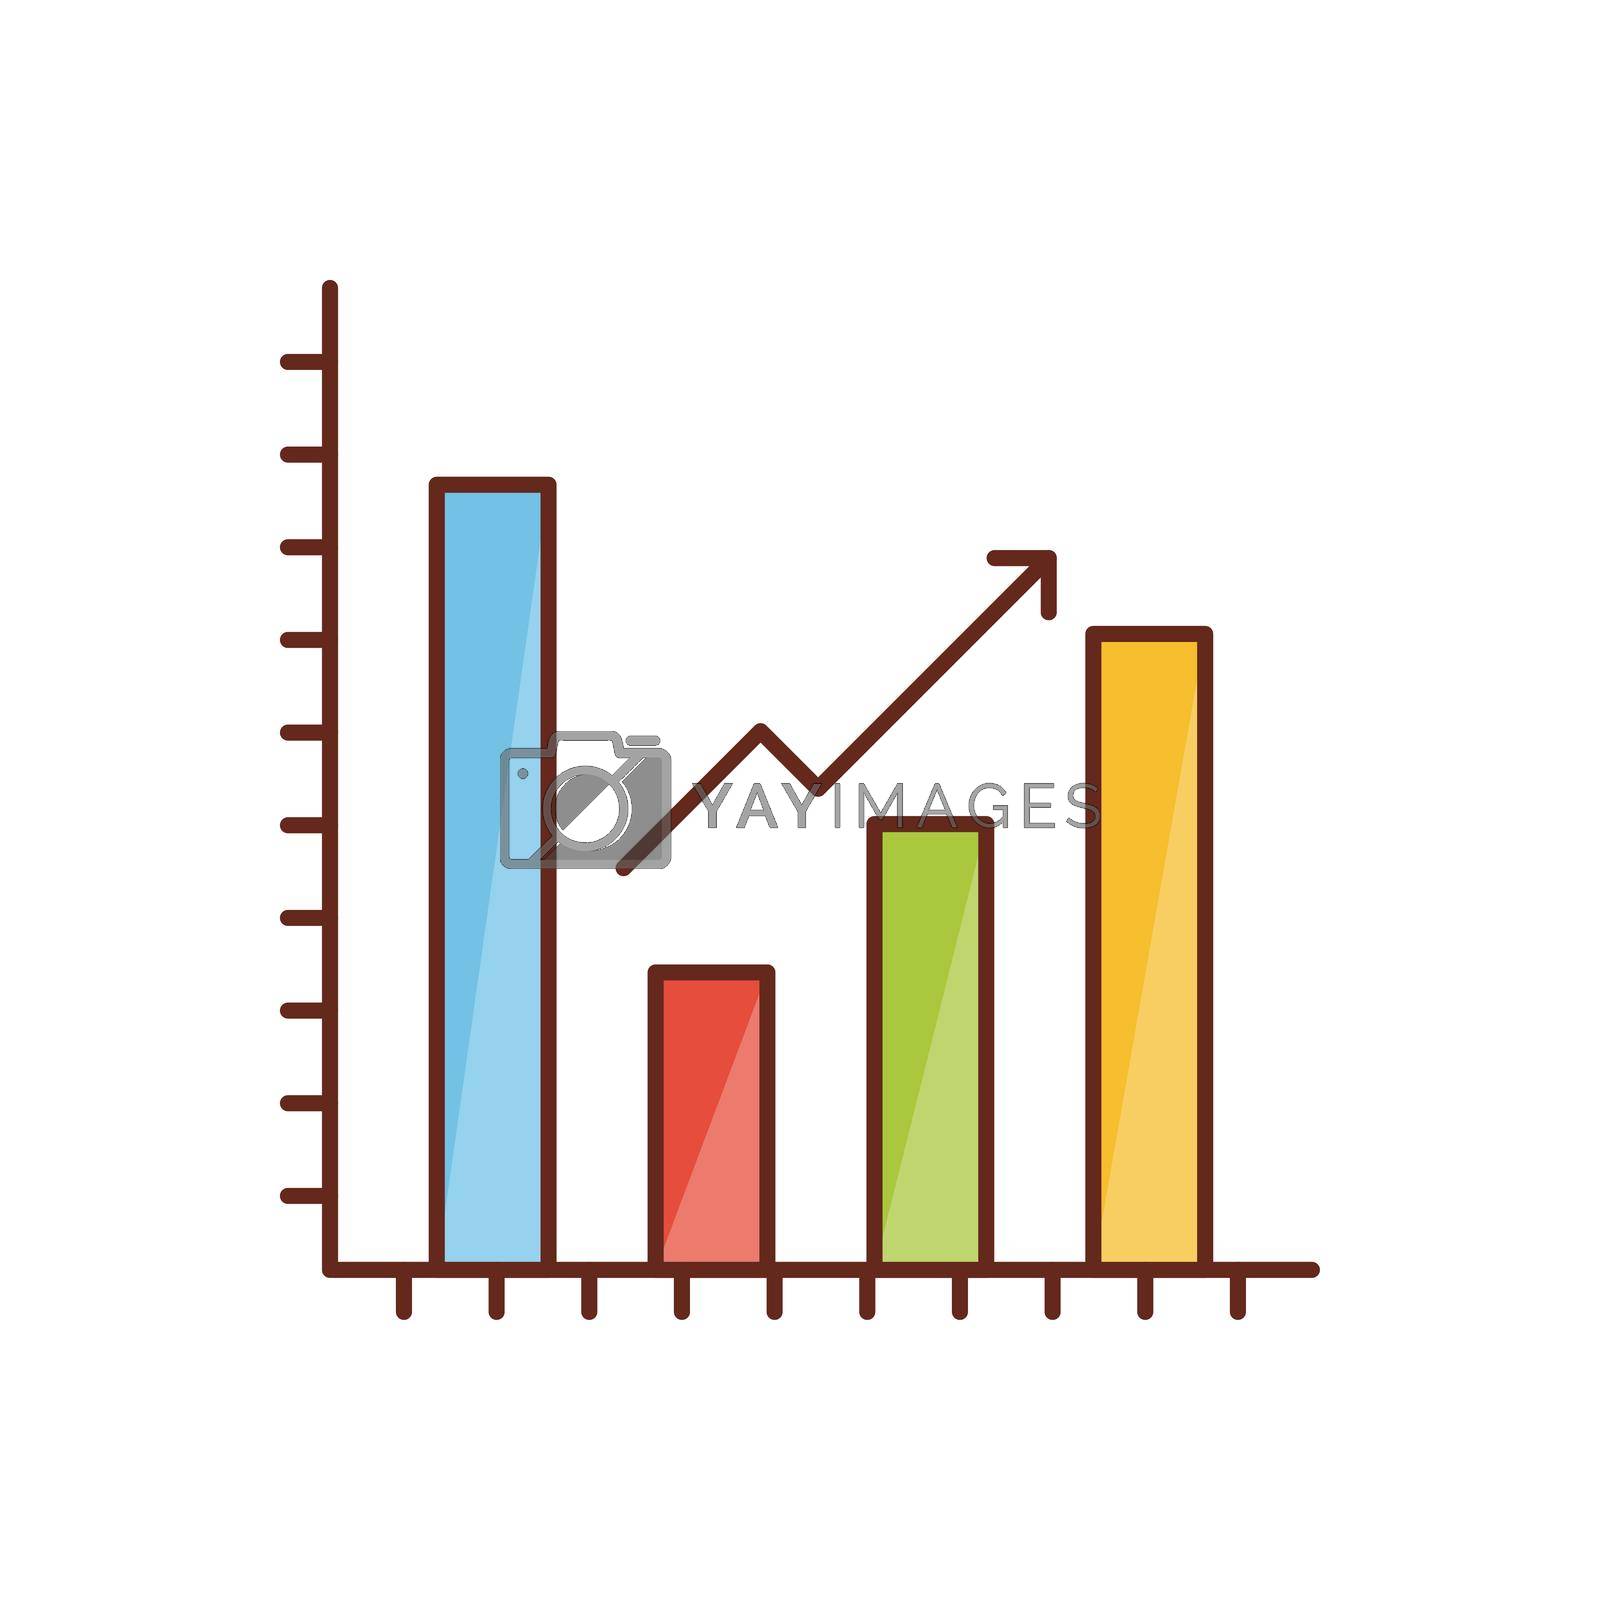 Royalty free image of statistics by FlaticonsDesign